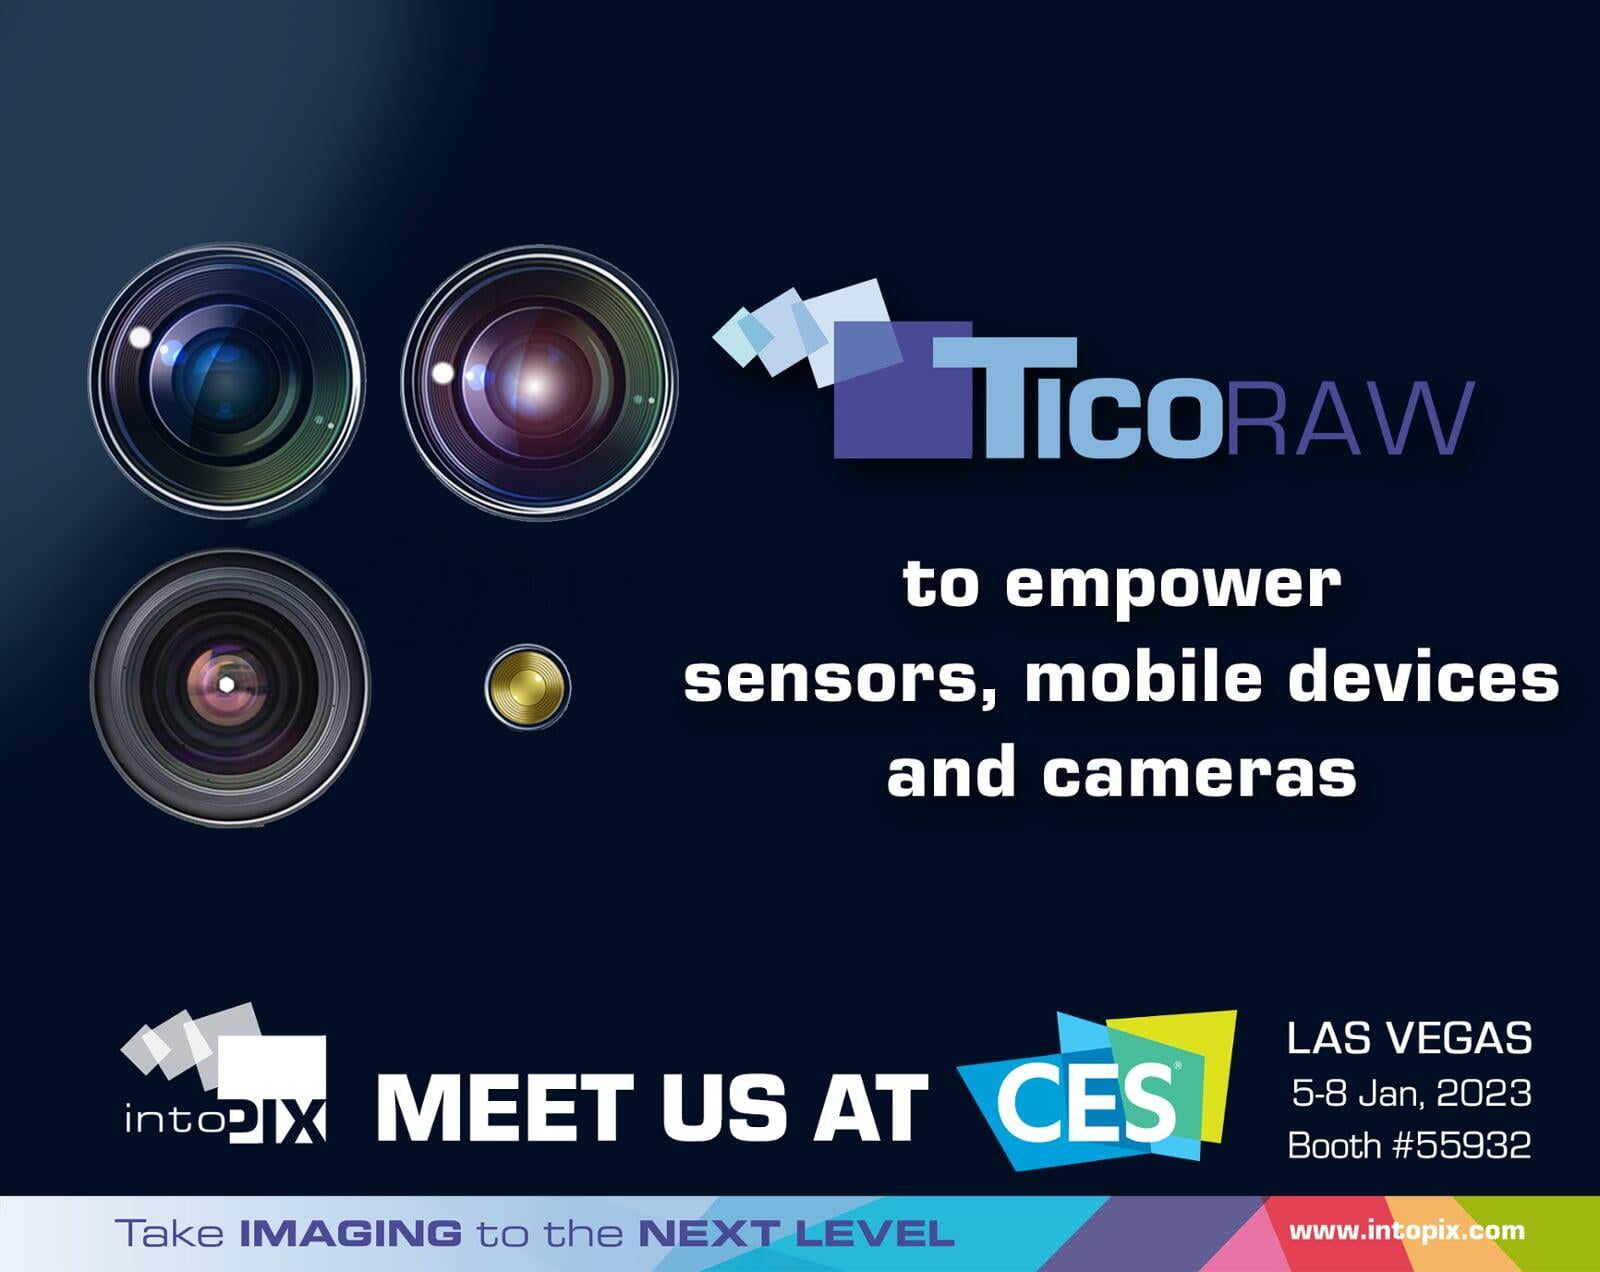 intoPIX TicoRAW technology empowers mobile devices, sensors, and cameras at CES 2023